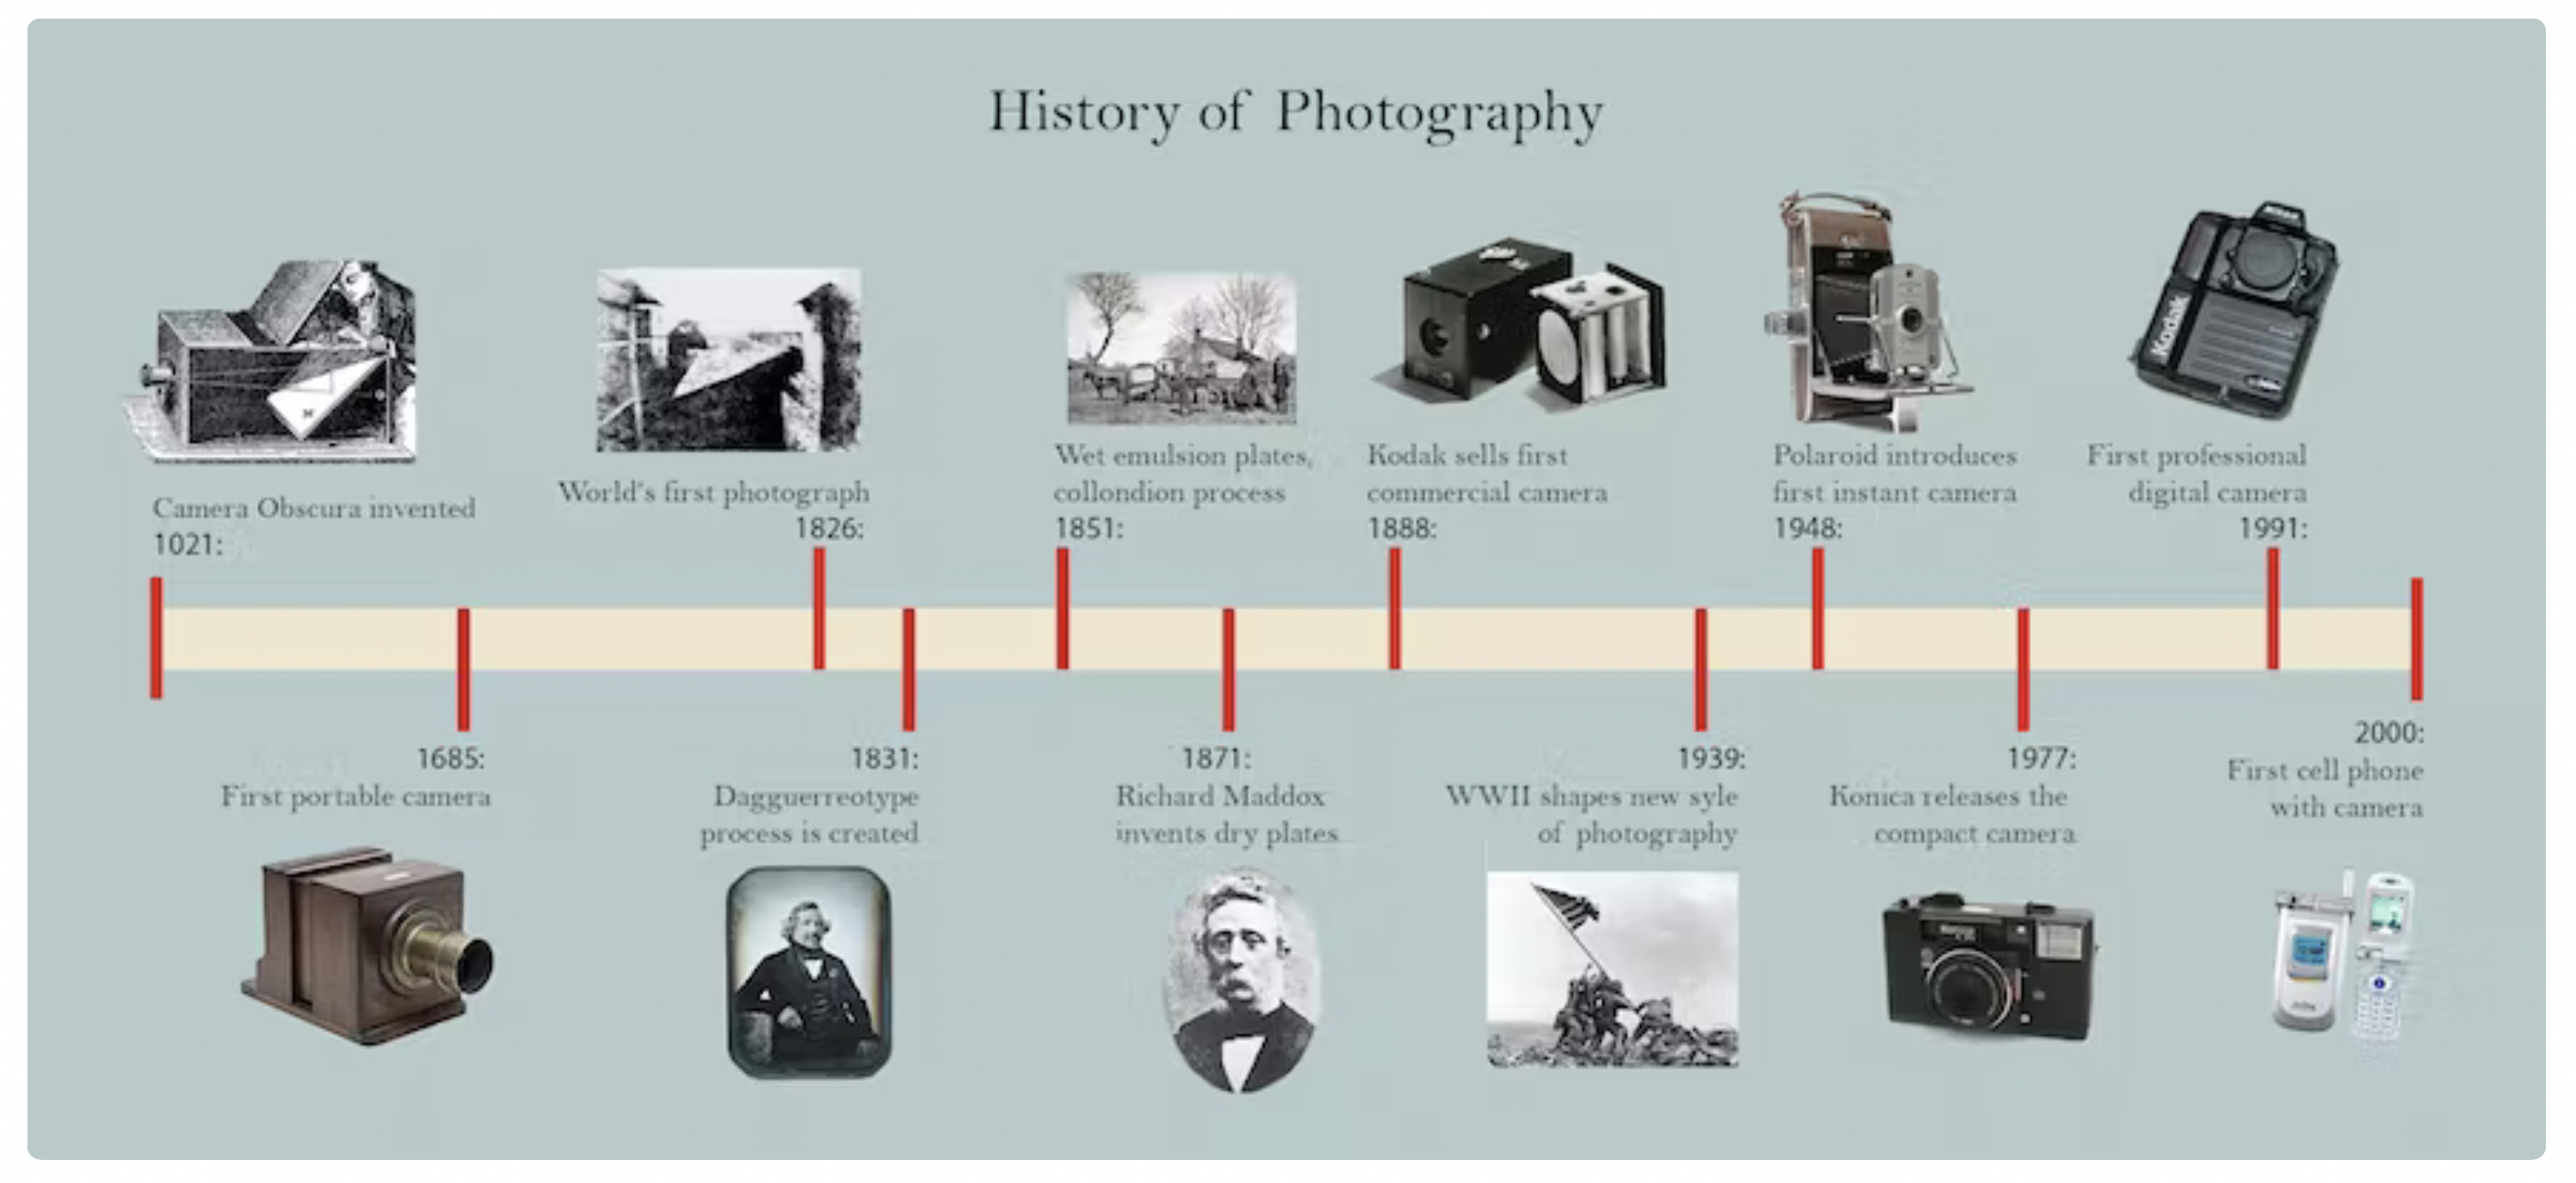 History of photography timeline. Image by Sean Ensch.